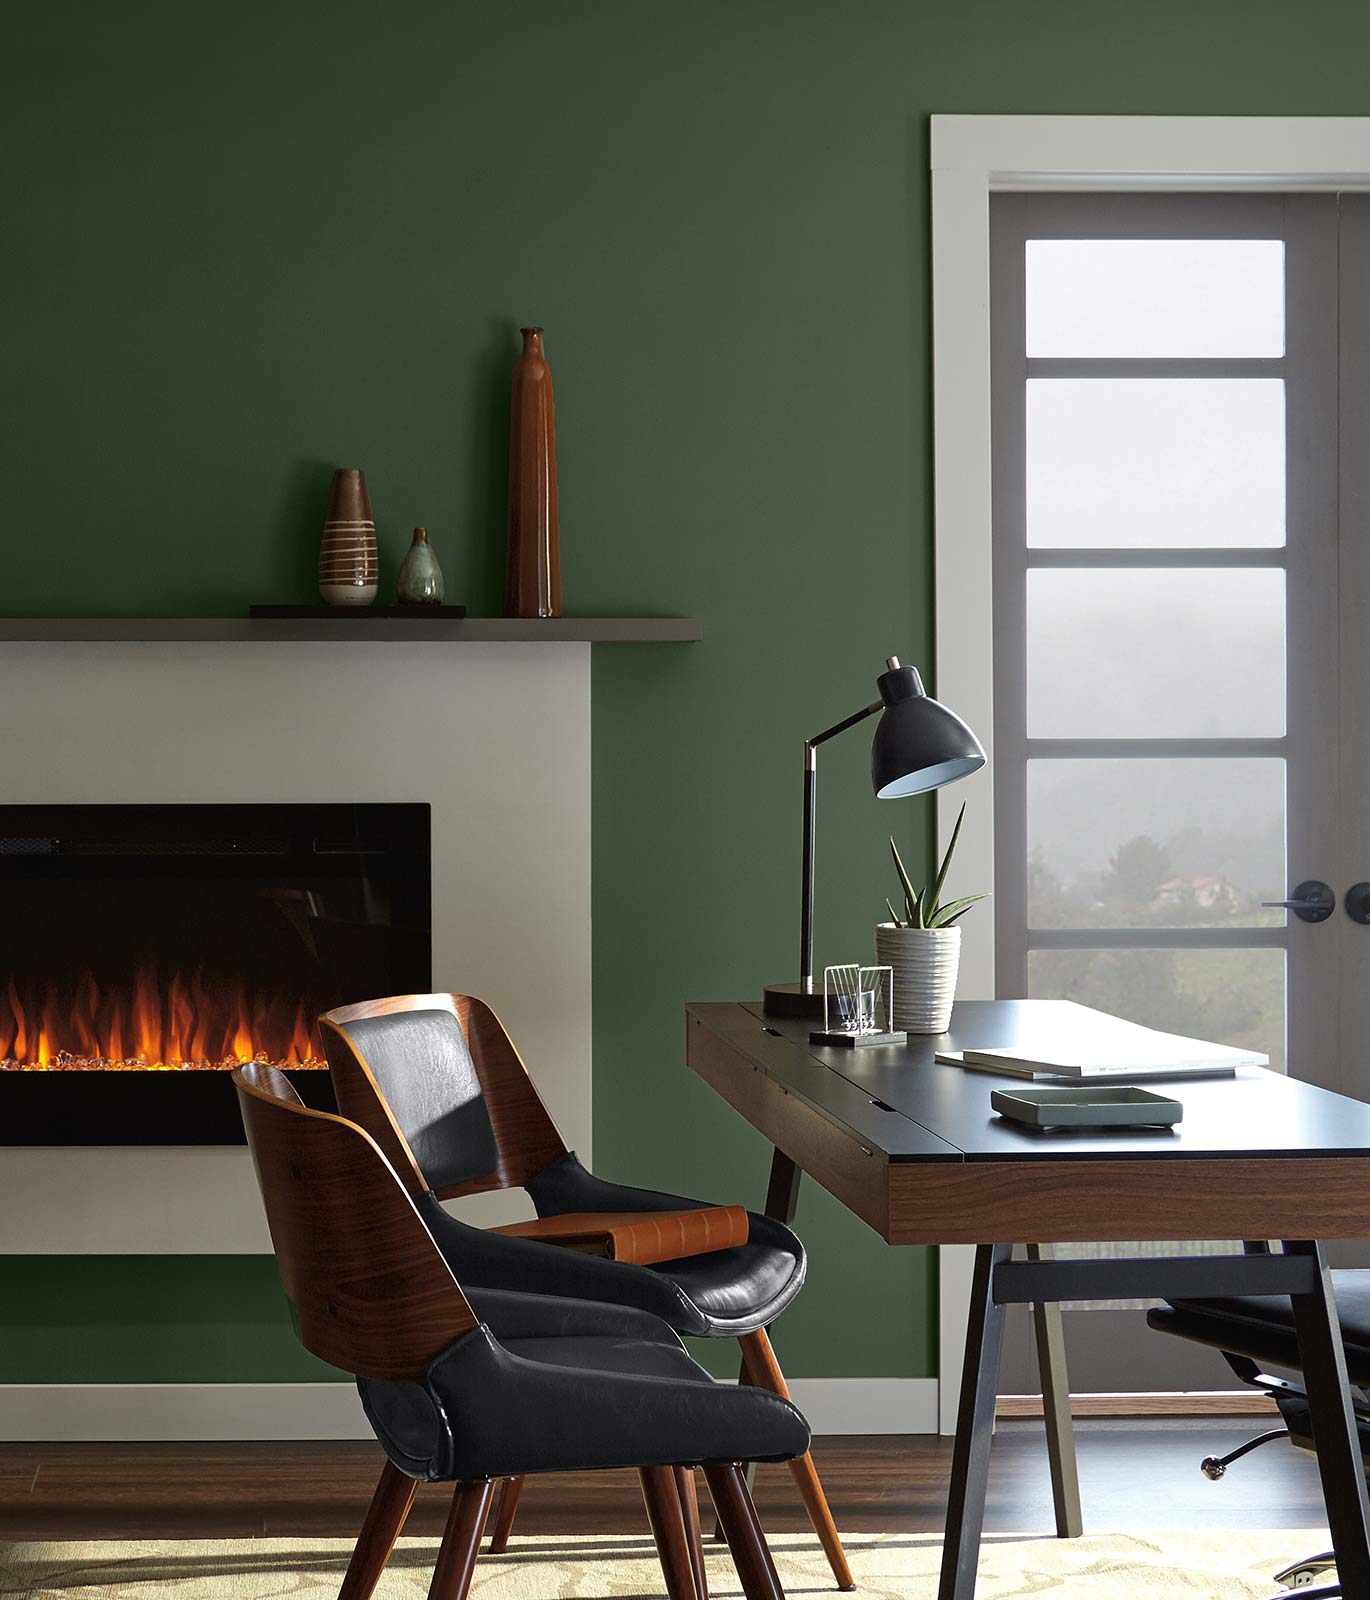 An office desk with a dark brown desk placed in front of a lit fireplace. Walls in the room are painted green. The mood is quiet and focused.